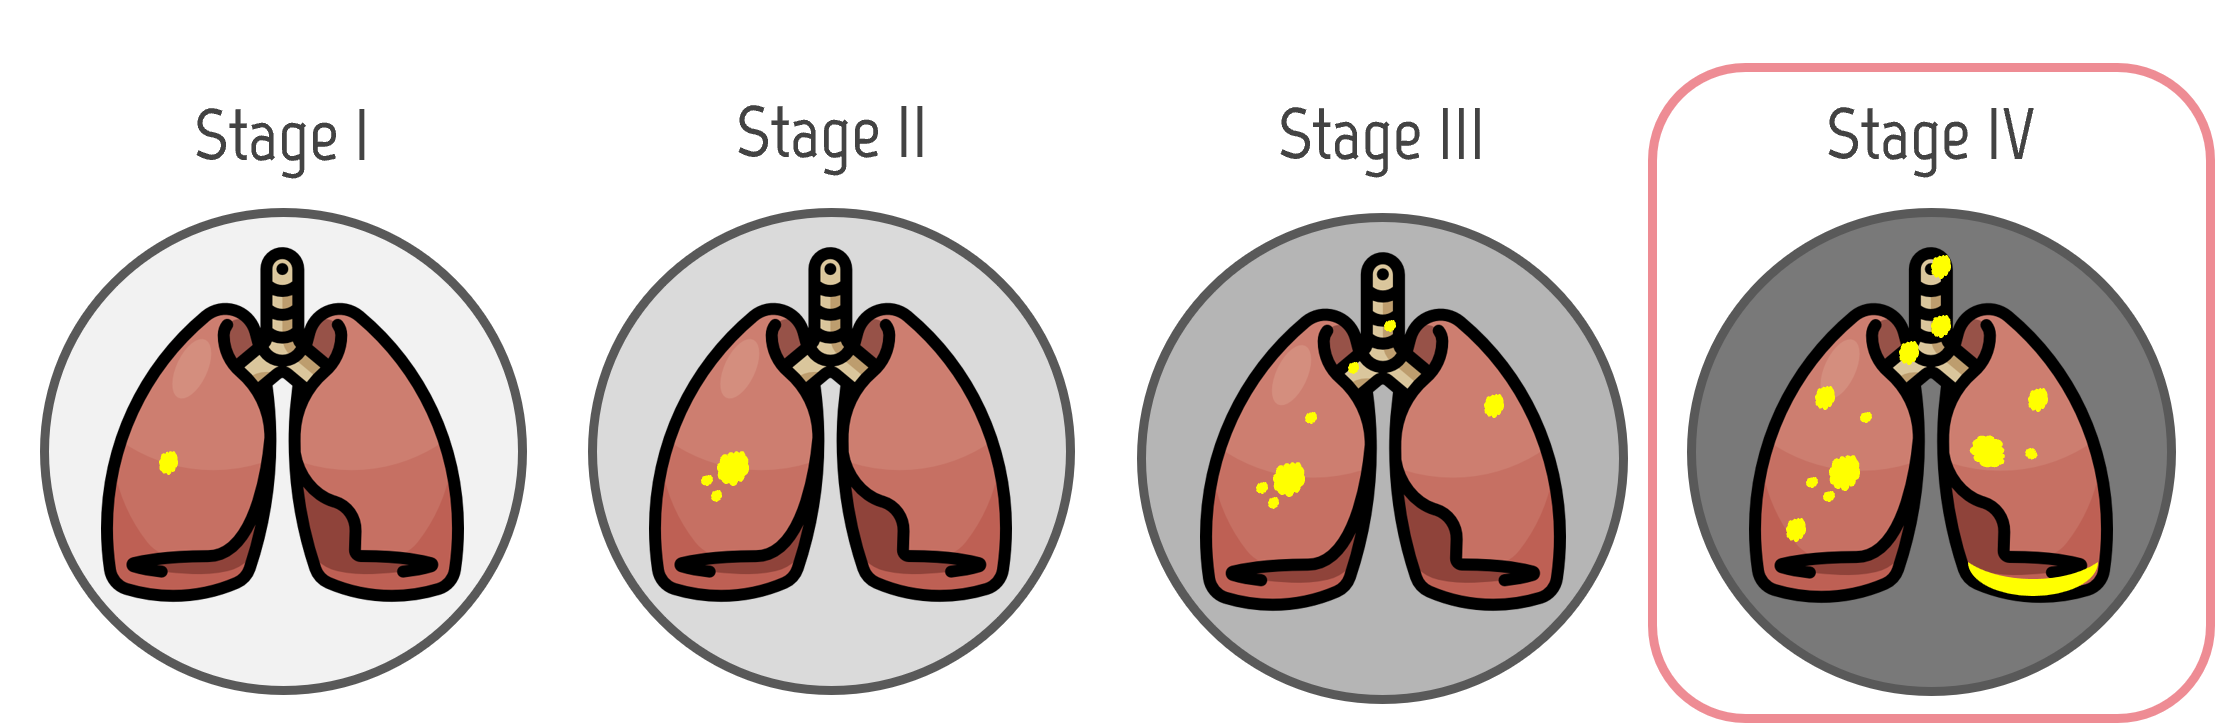 Lung cancer stages